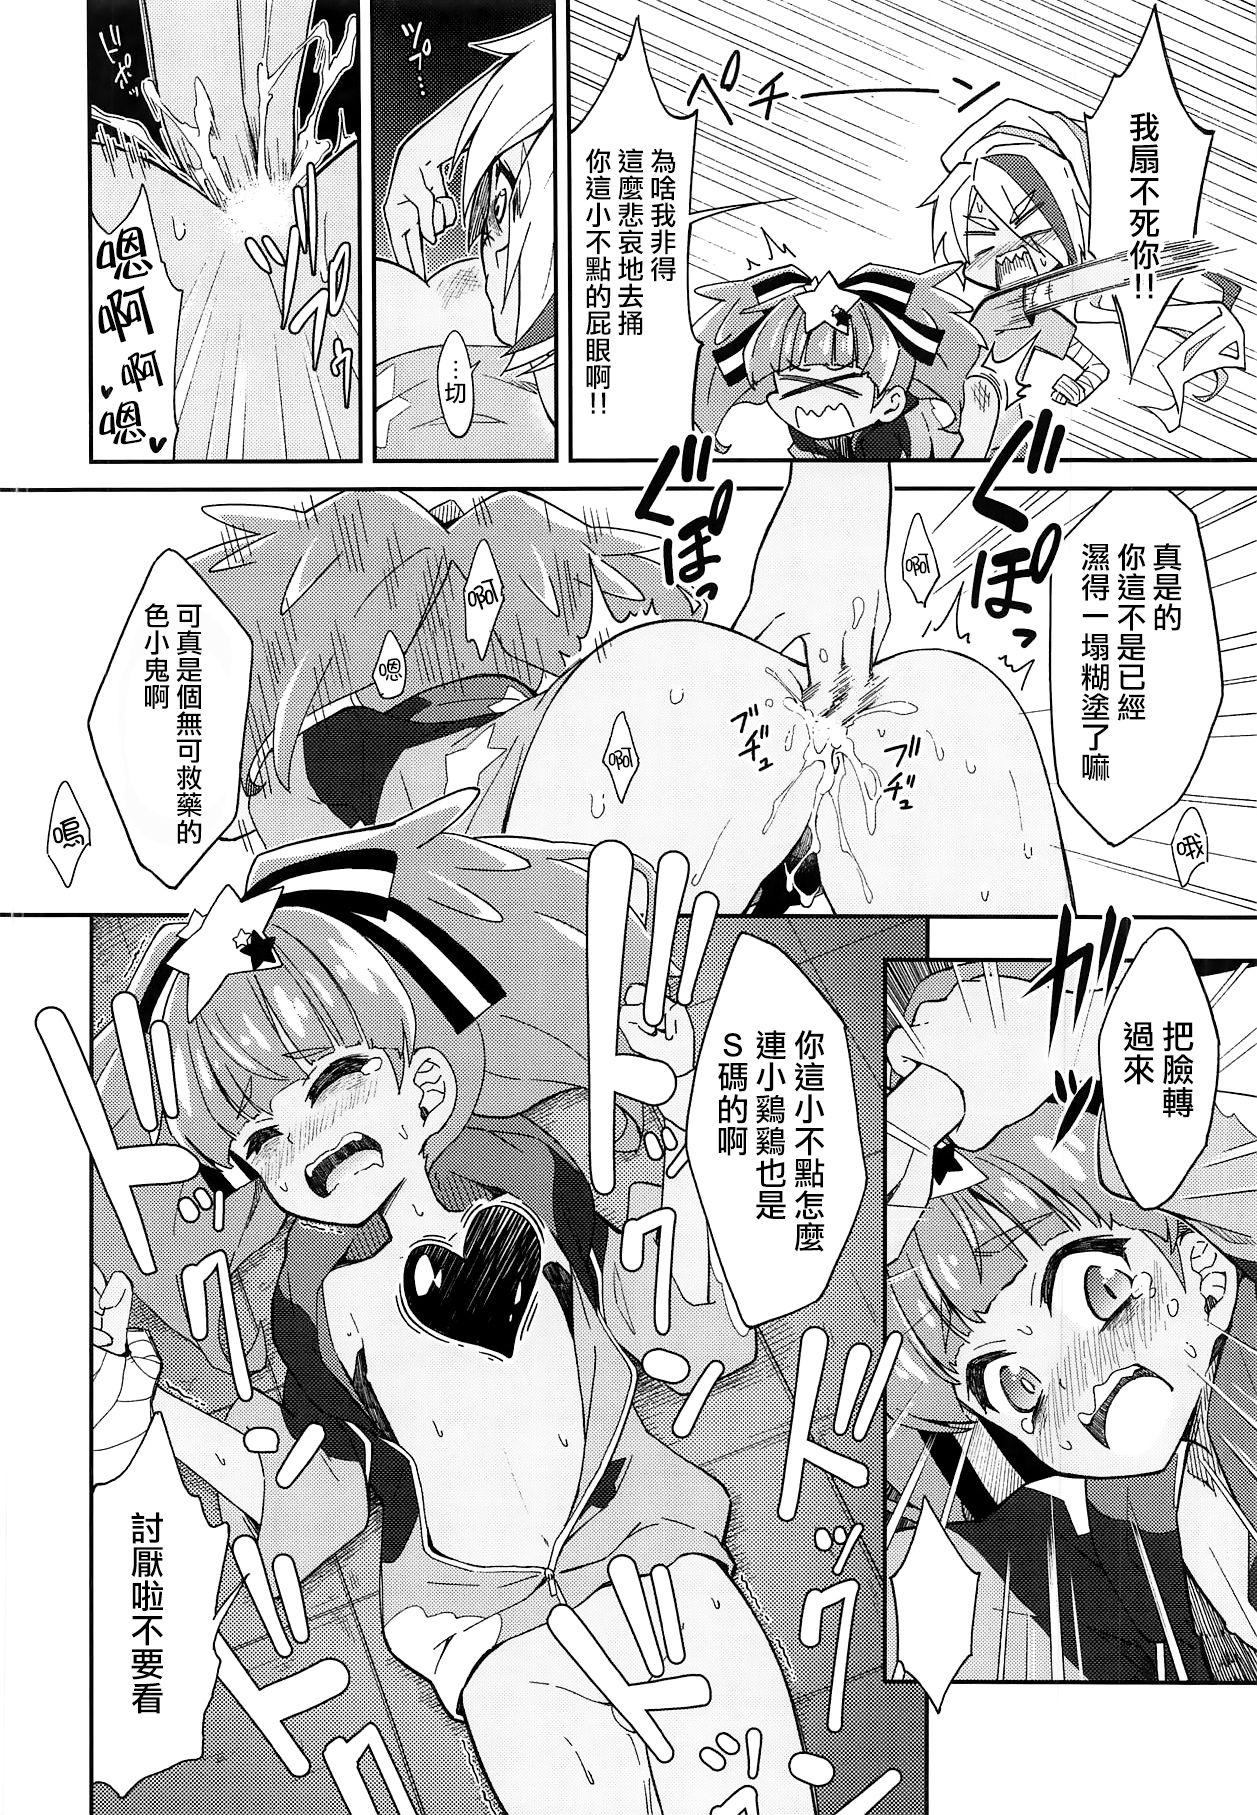 Transsexual Lovely Girls' Lily Vol. 18 - Zombie land saga Buttplug - Page 8